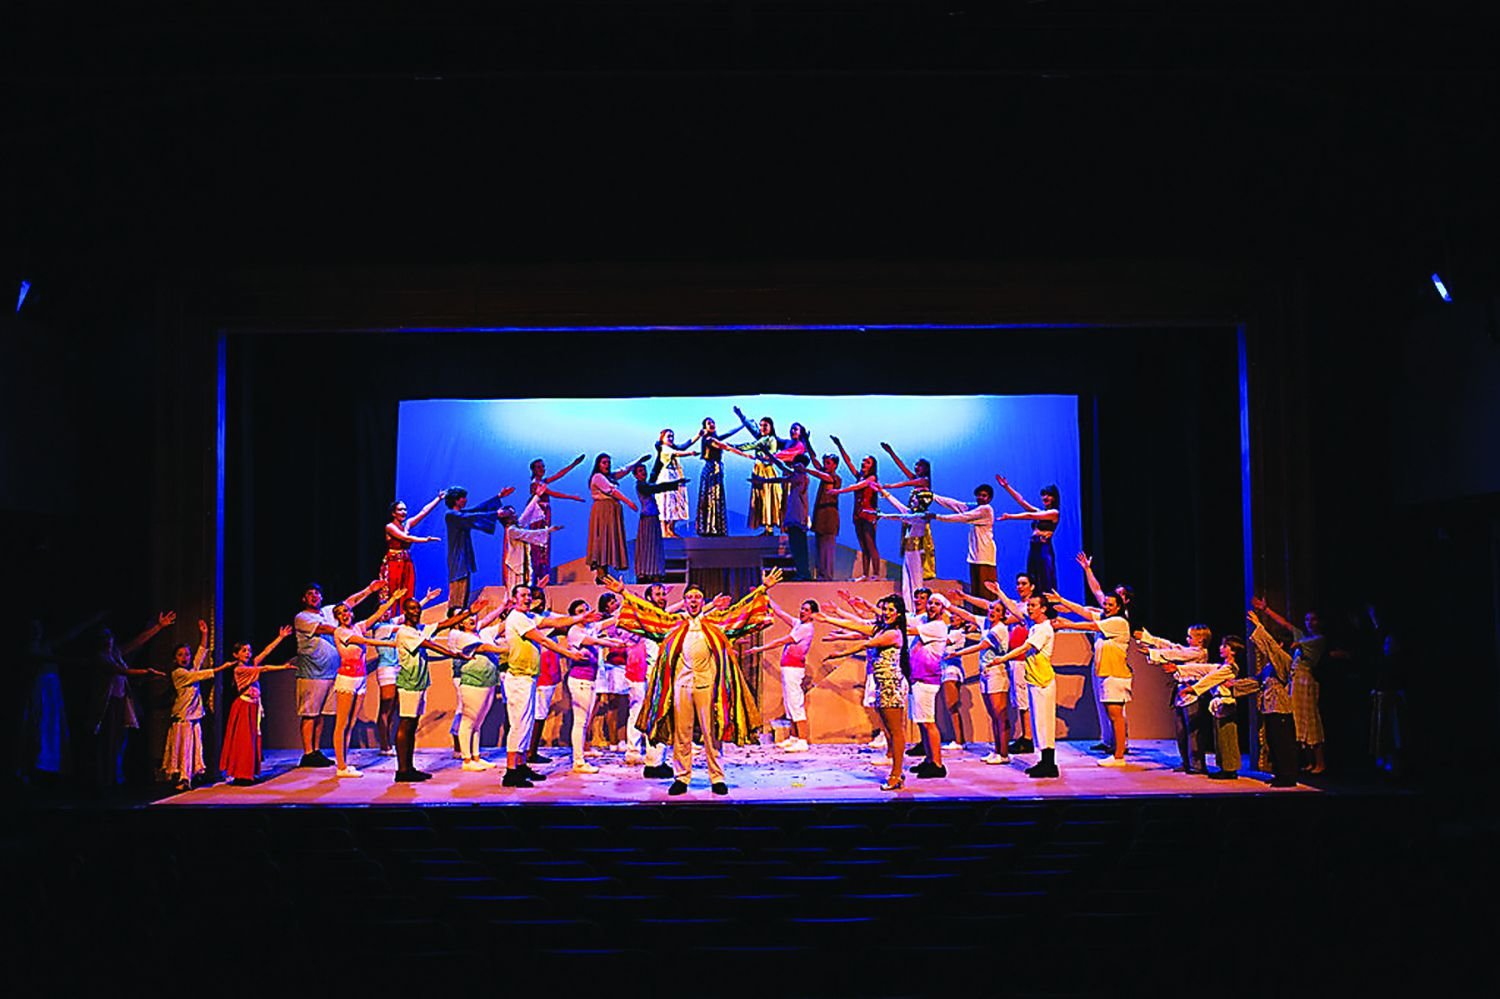 “Joseph and the Amazing Technicolor Dreamcoat” is on stage at Music Mountain Theatre in Lambertville, N.J.